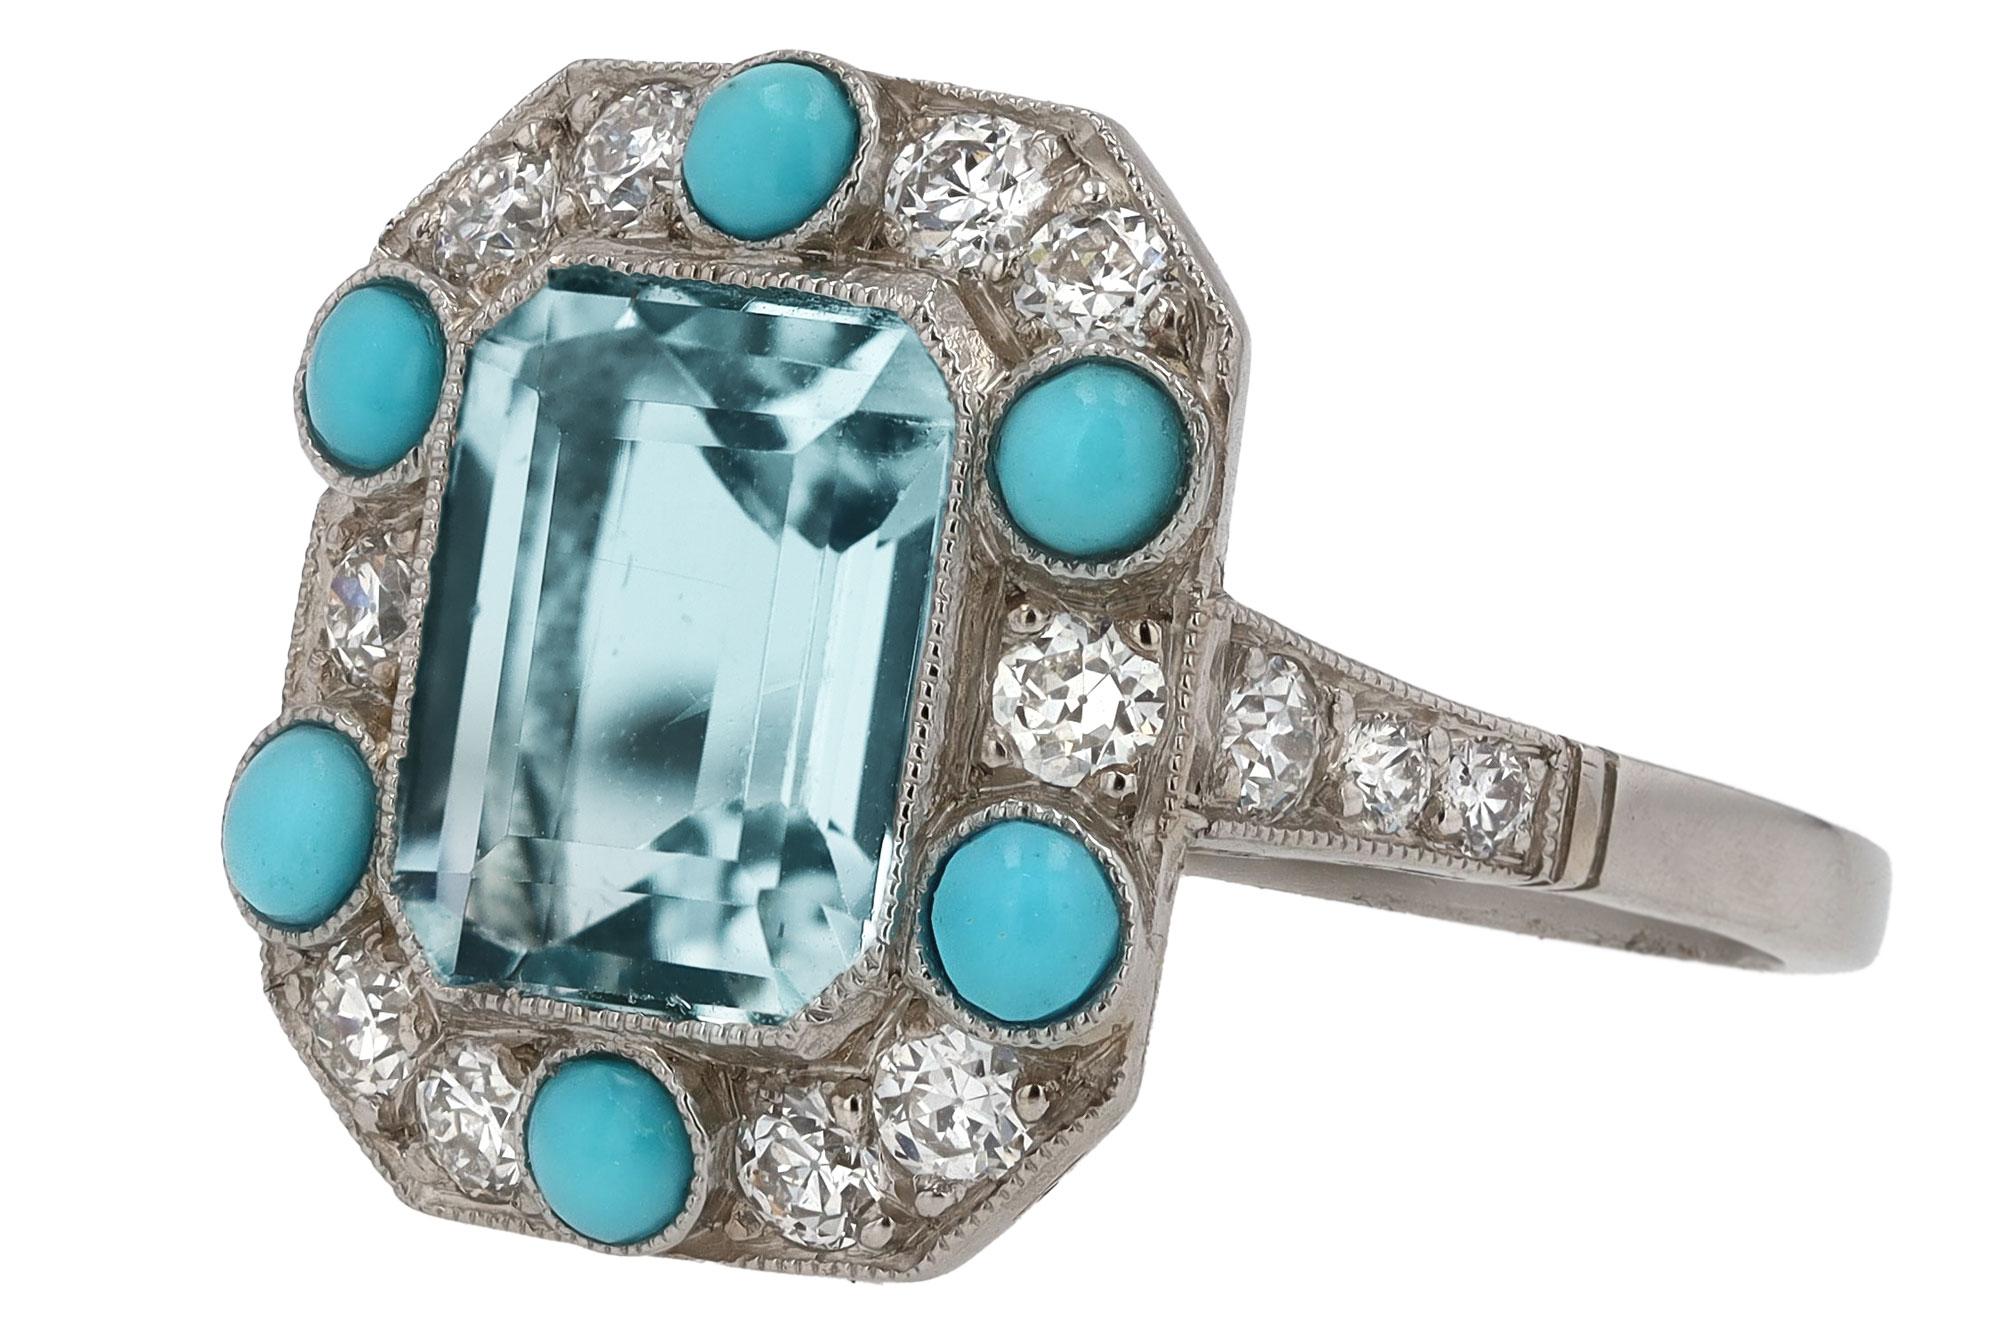 Fresh and lively describes the color combination of this Aquamarine gemstone engagement ring. Paired with Persian turquoise and diamonds, this hand fabricated platinum masterpiece is a faithful emulation of the Art Deco period loaded with great